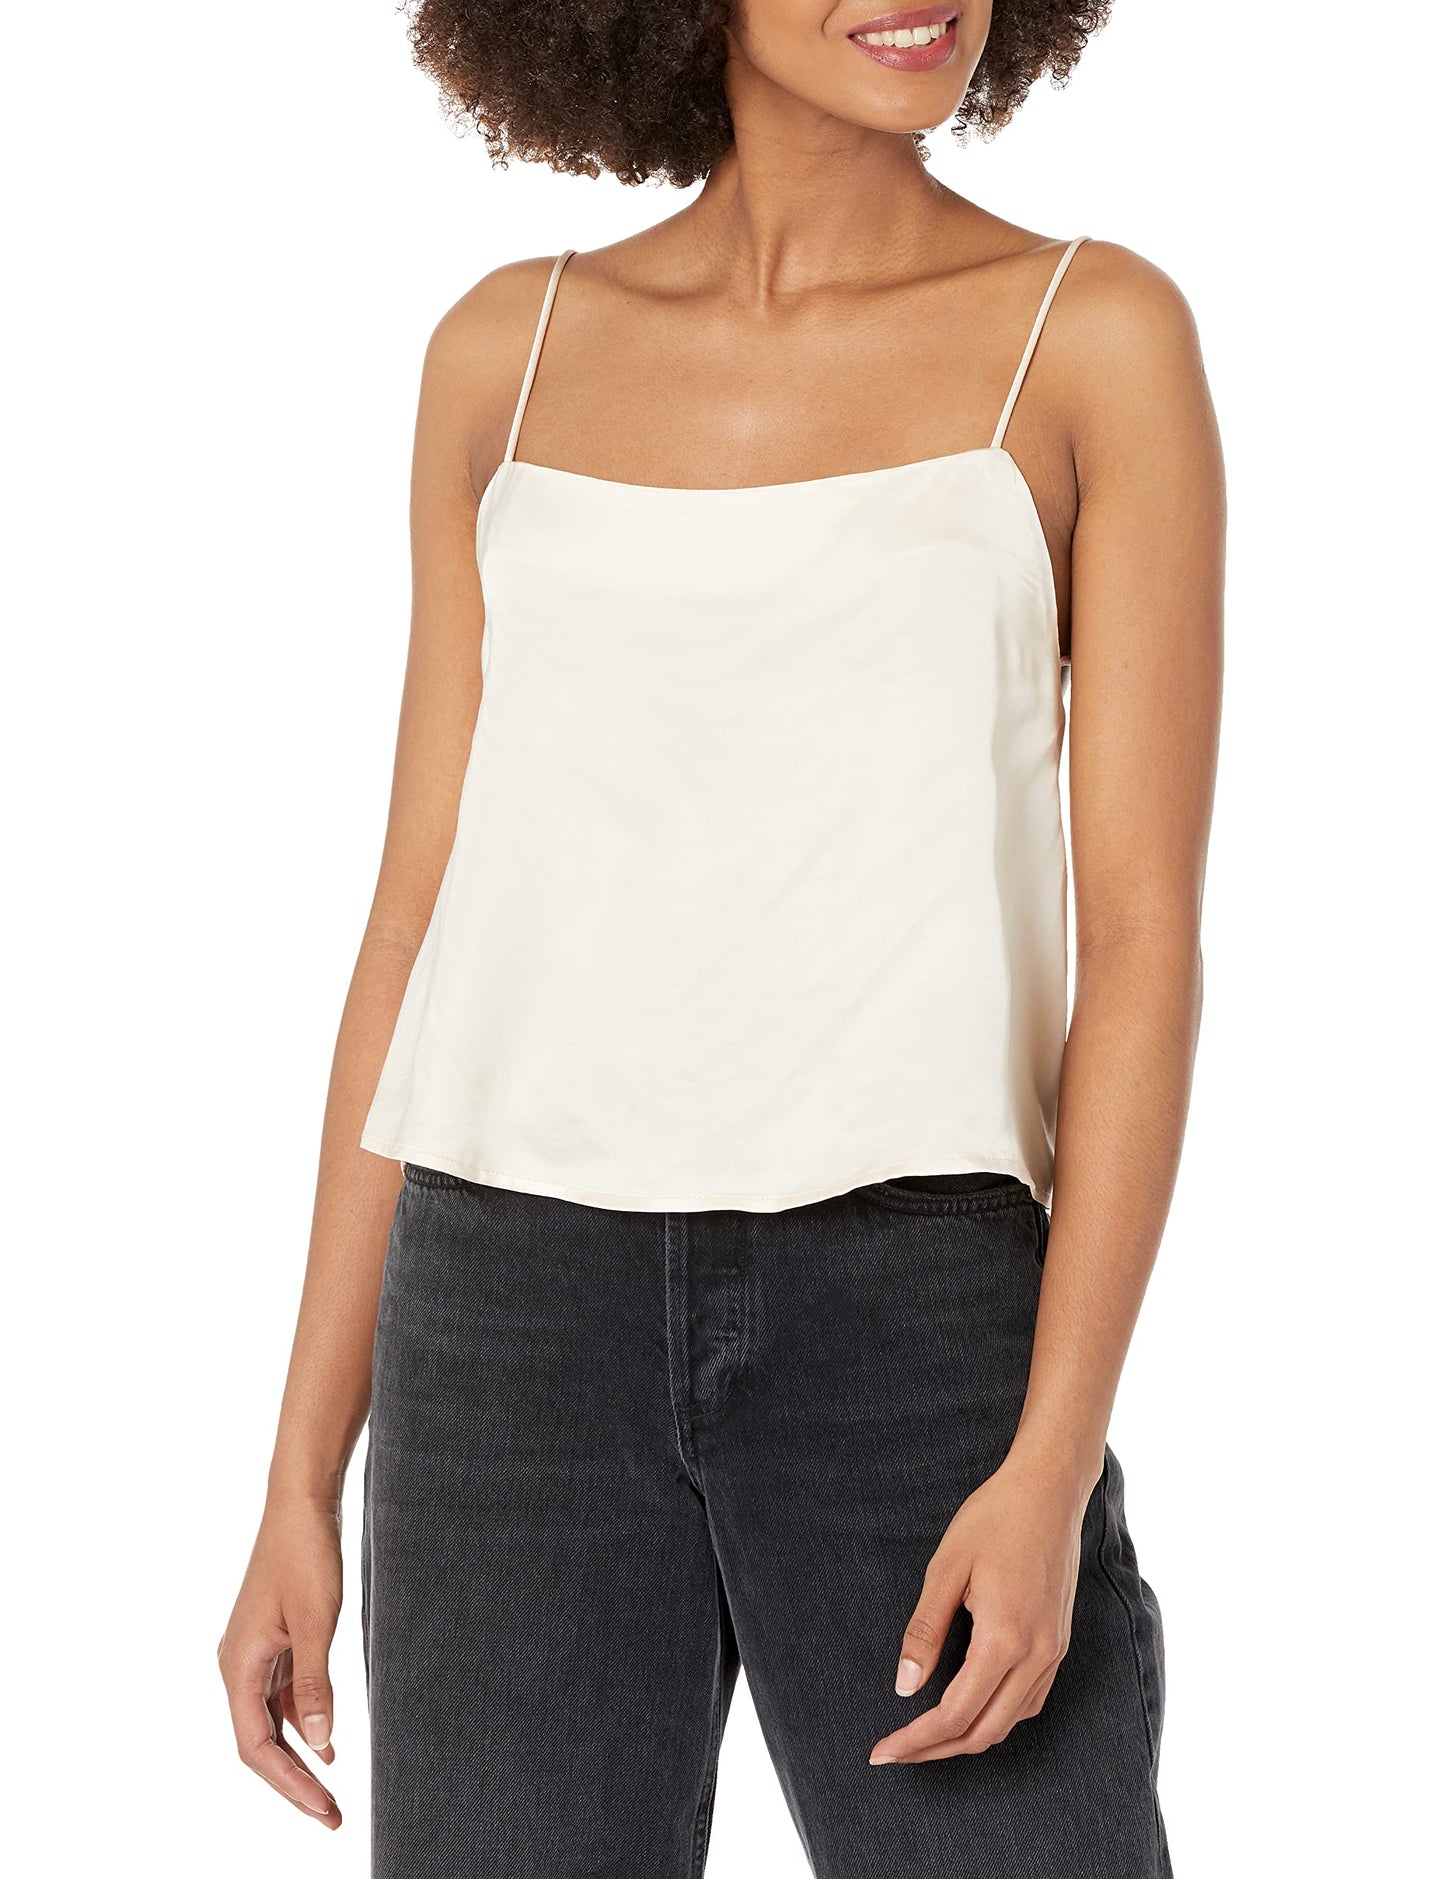 ASTR the label womens Astr Women's Rosemont Cami Blouse, Cream, X-Small US